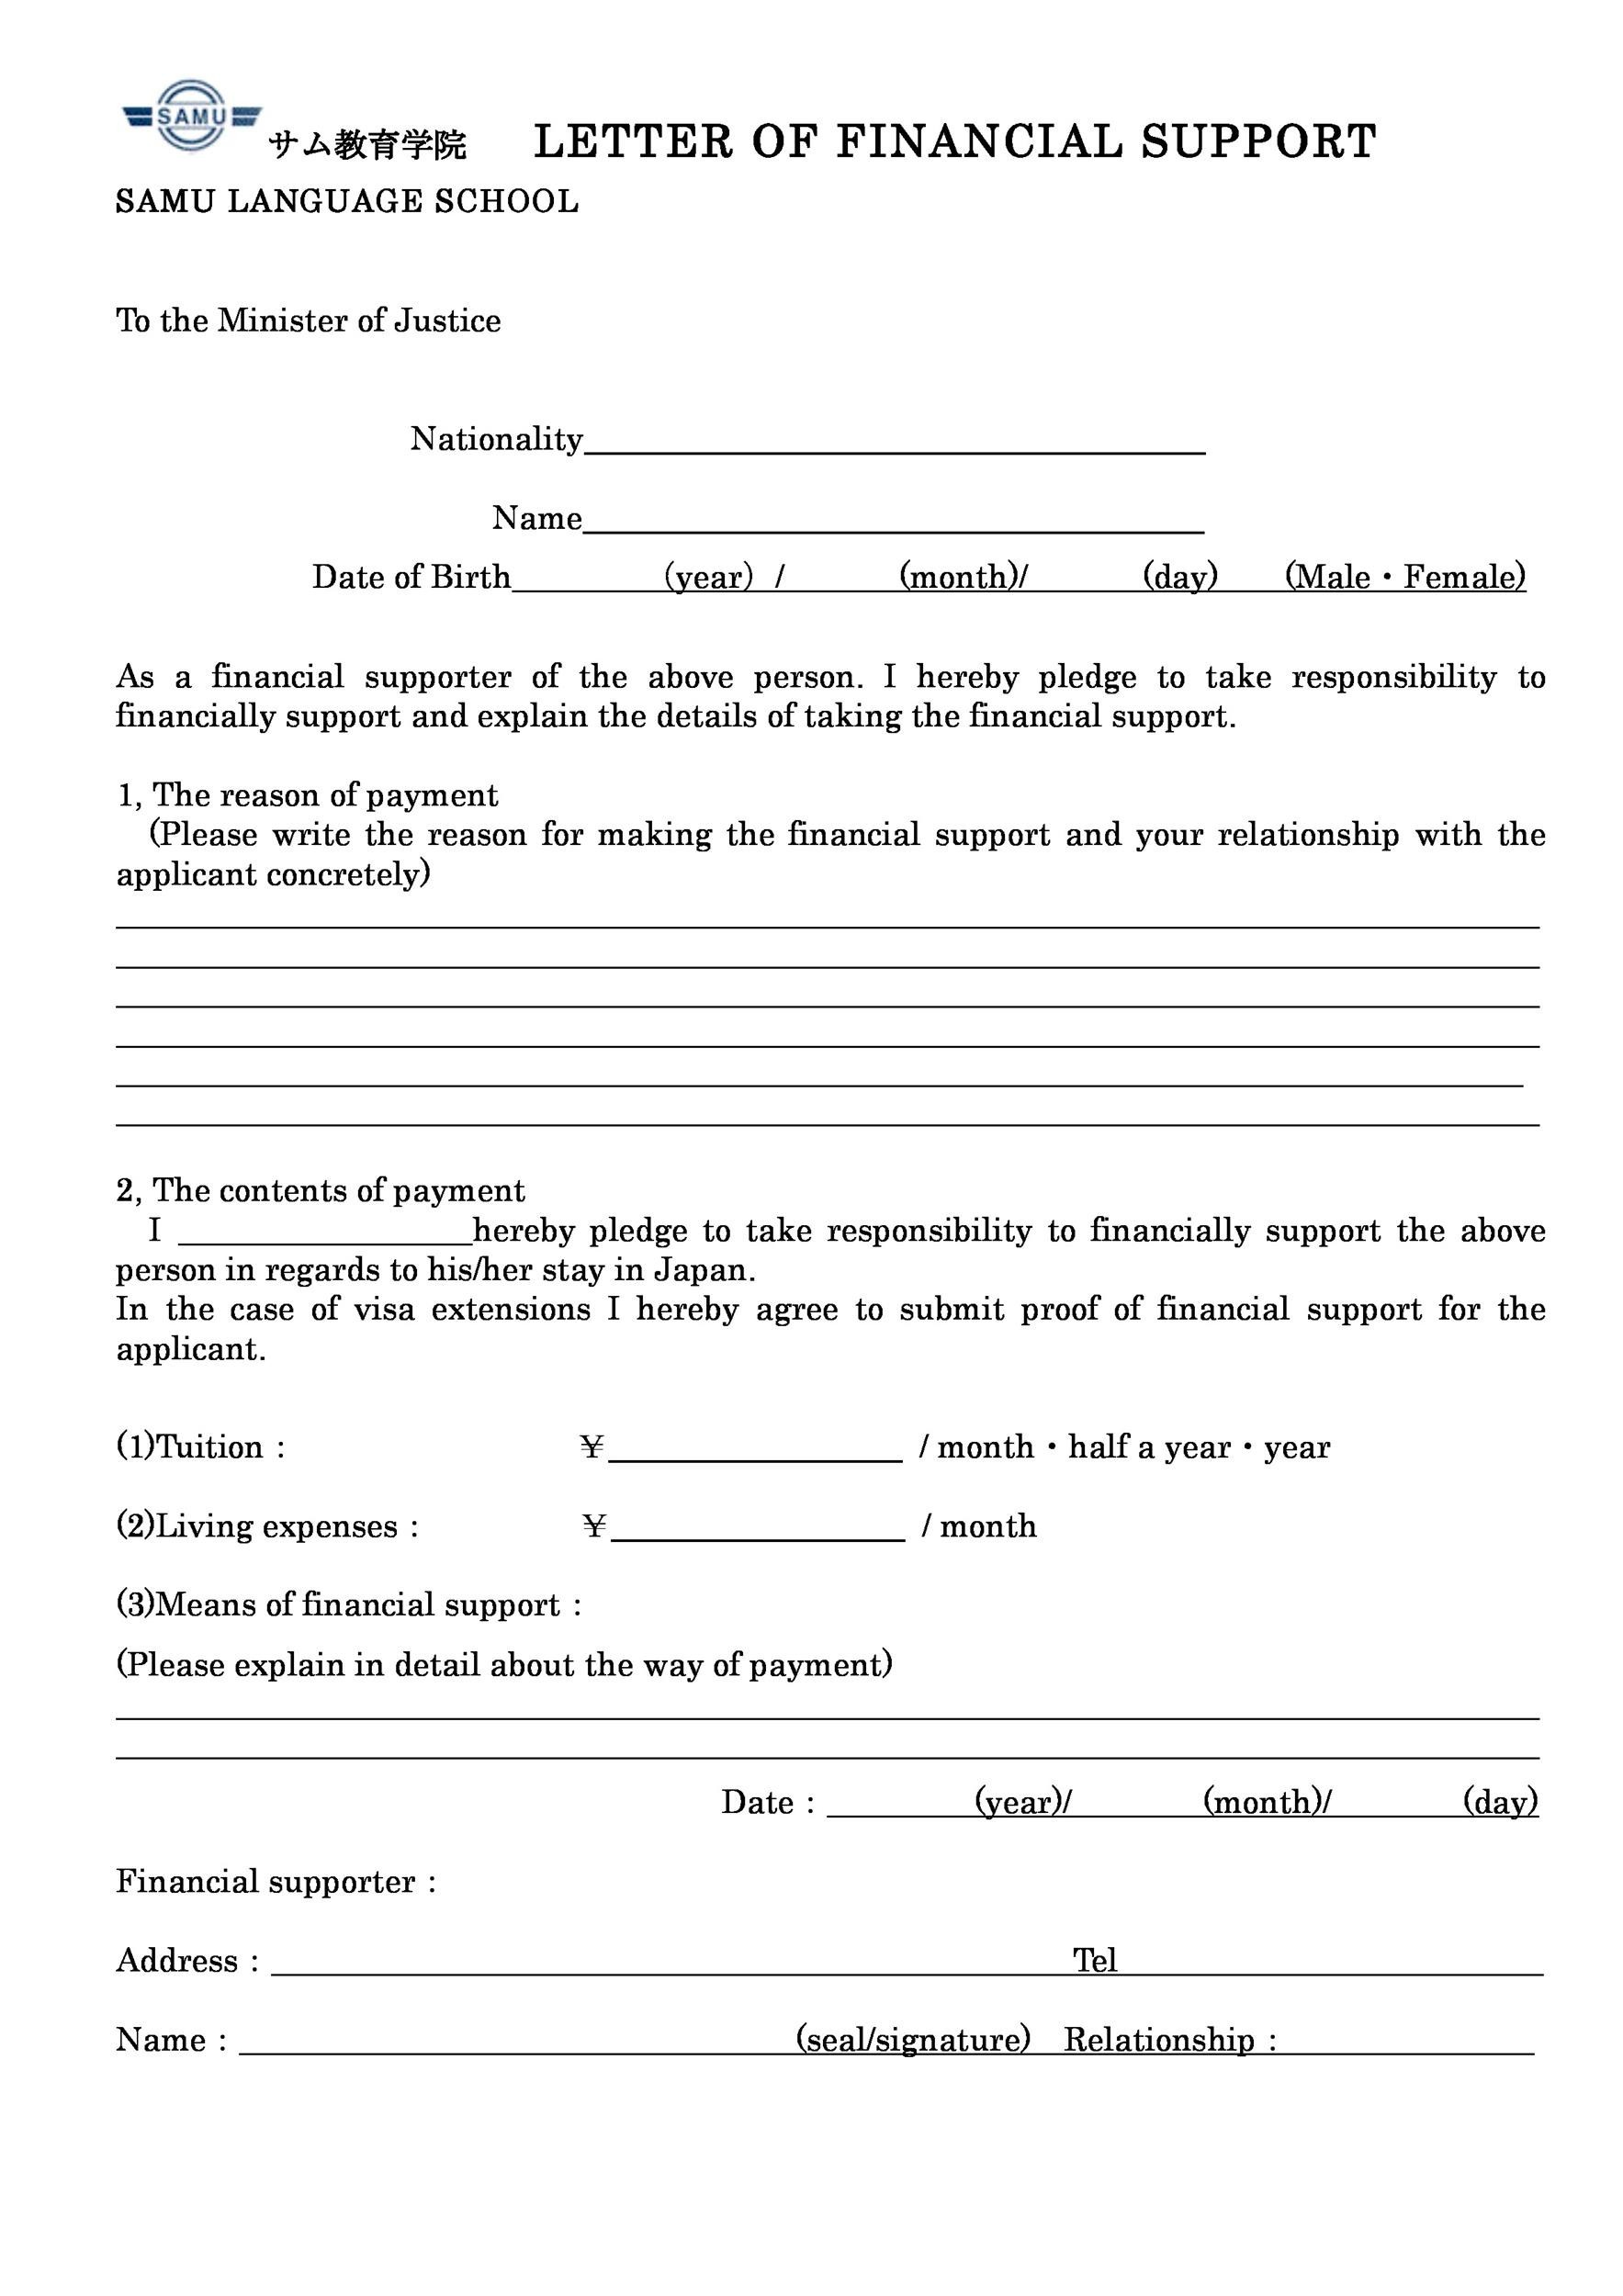 40 Proven Letter Of Support Templates Financial For Grant